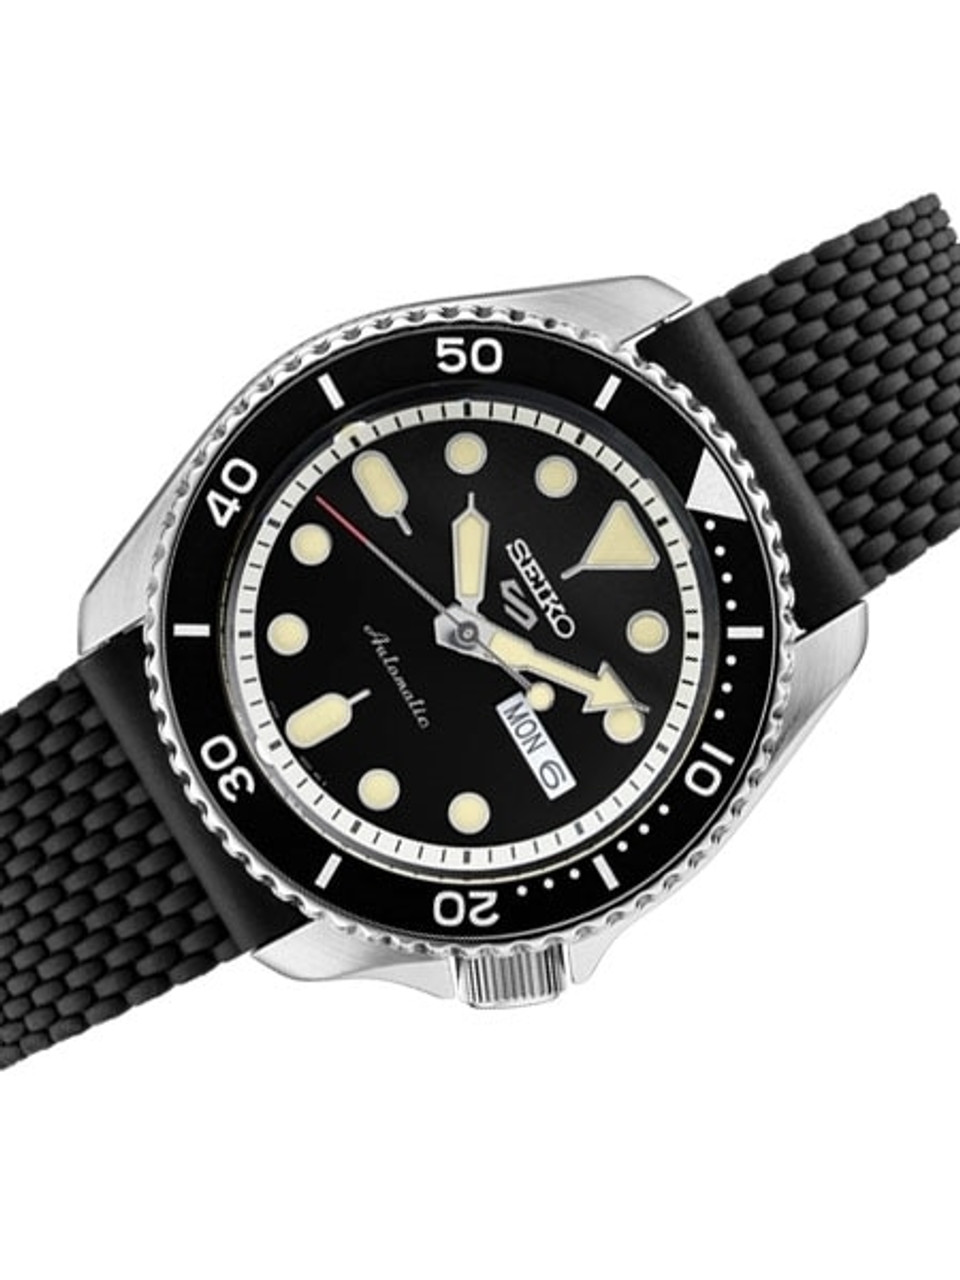 Seiko 5 Sports Automatic 24-Jewel Watch with Black Dial #SRPD95